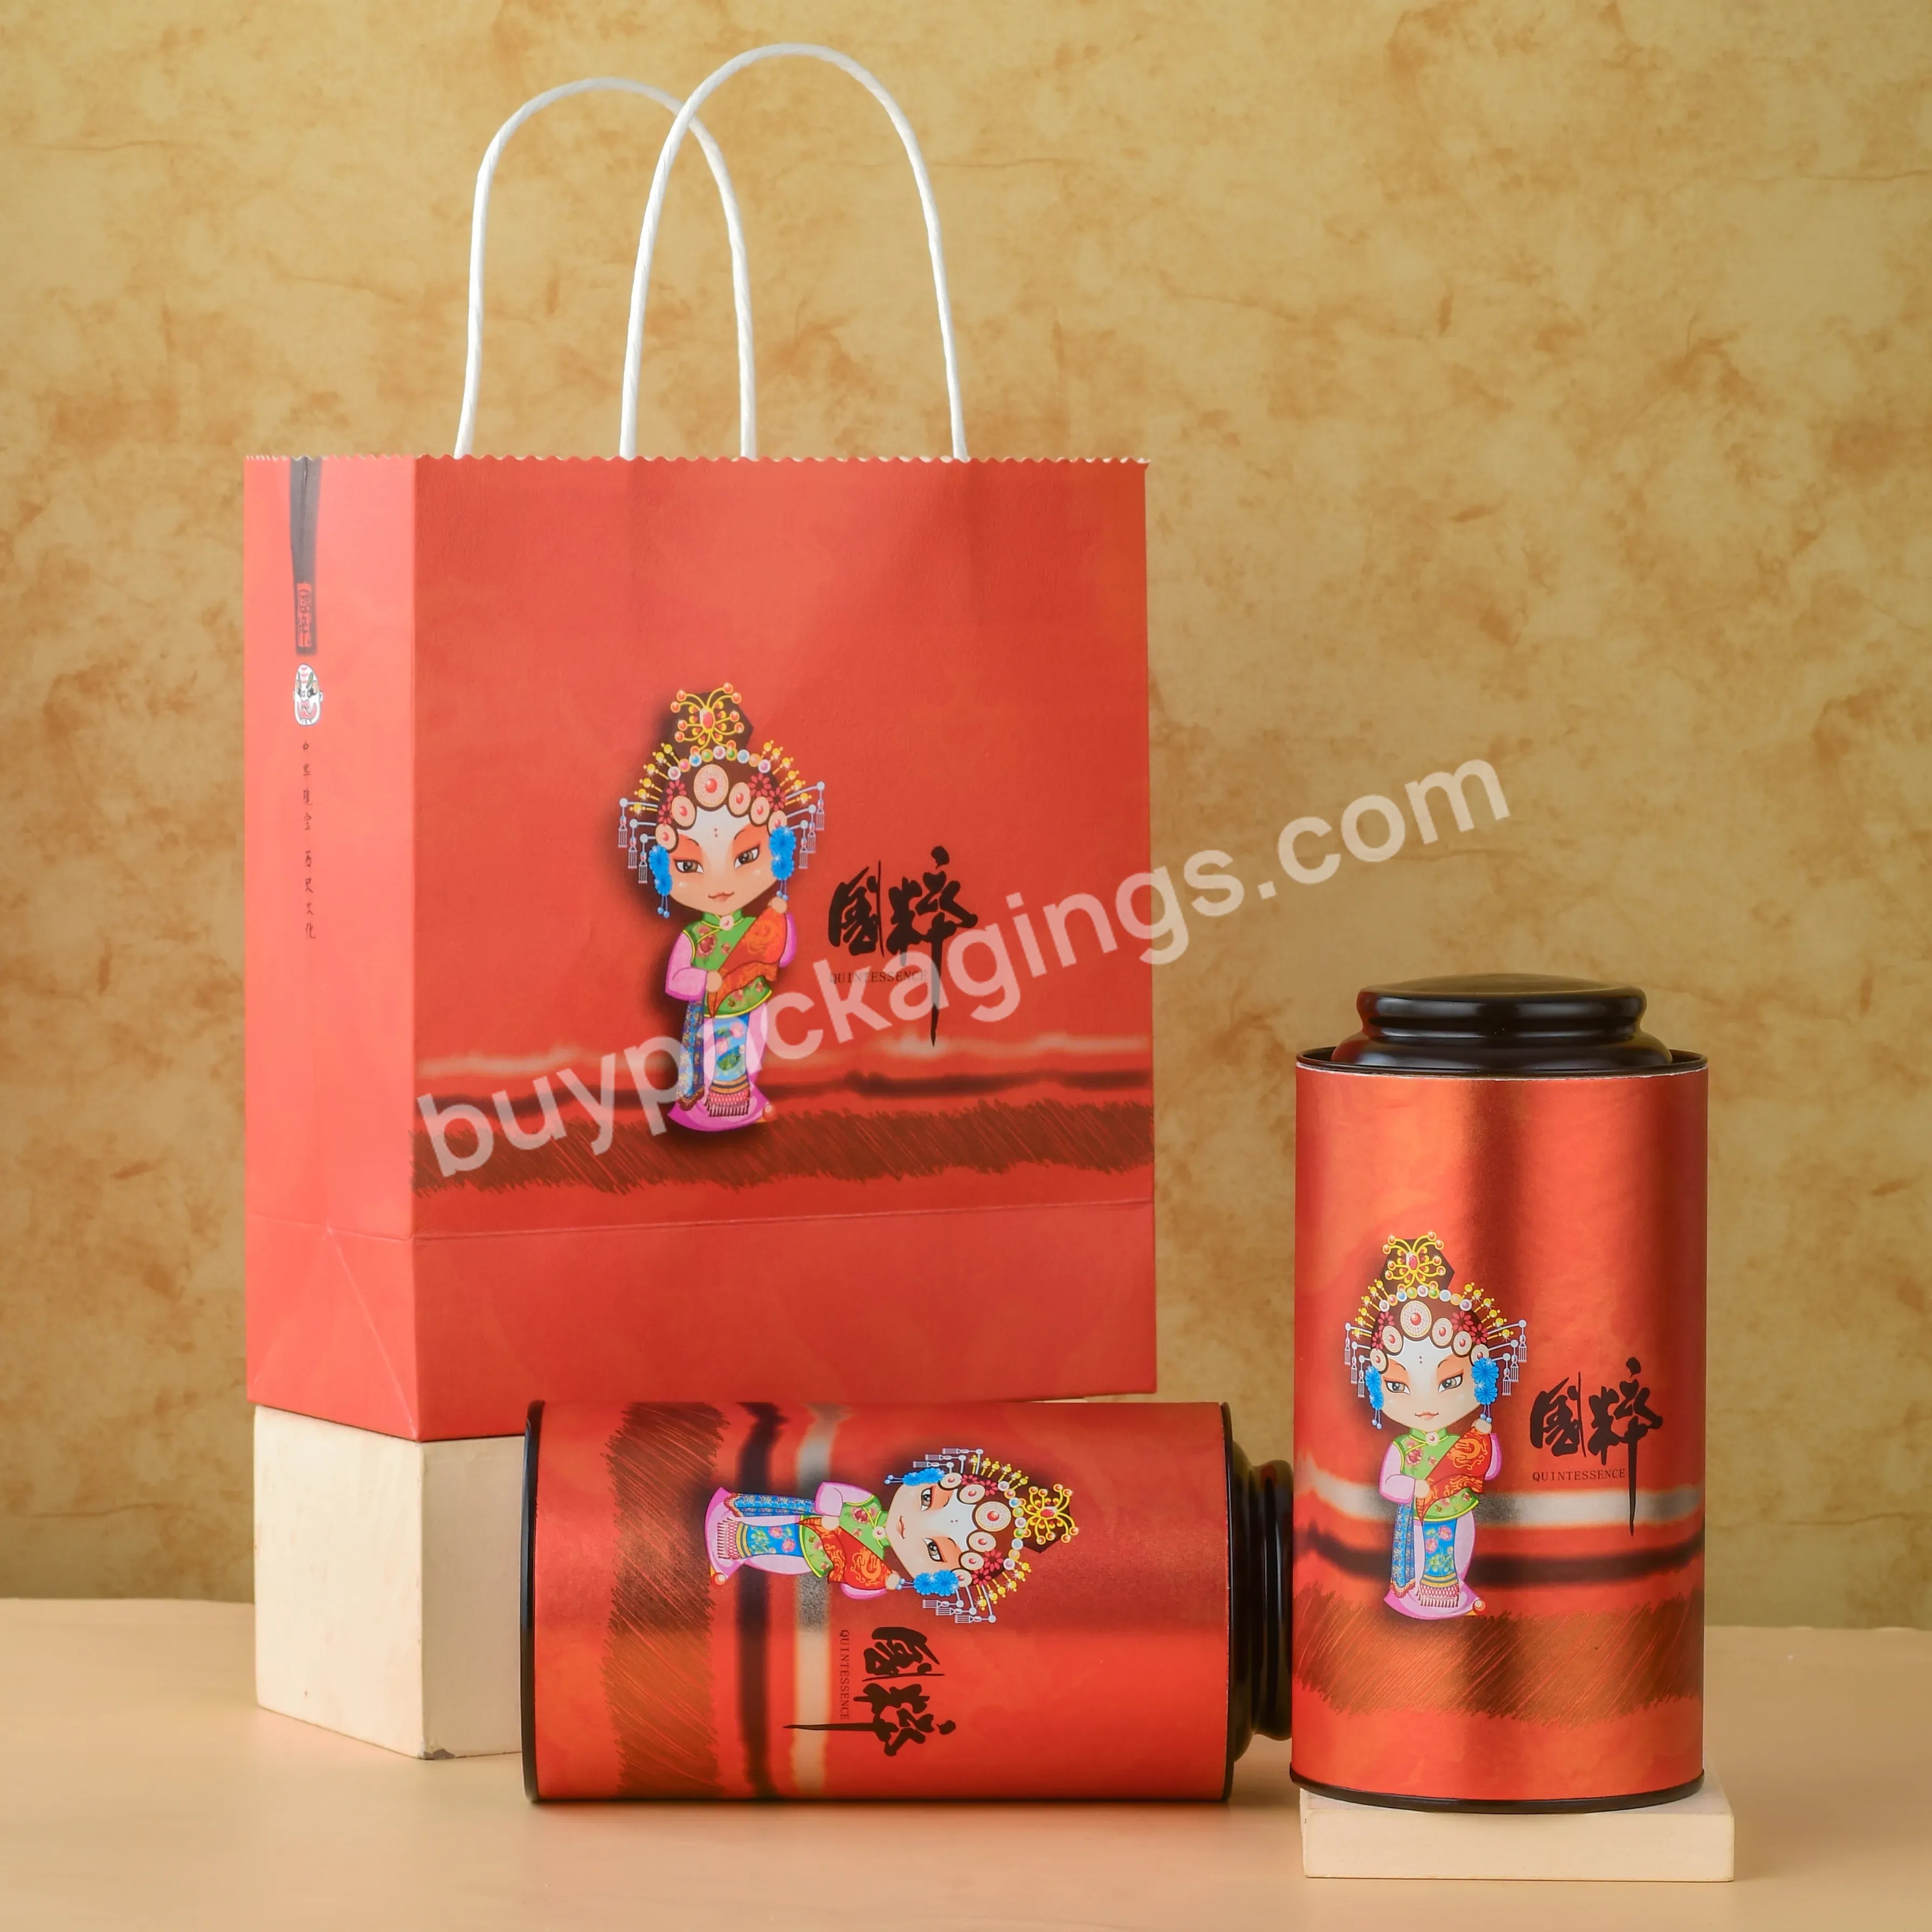 Tianyi Packing 27 Years Experience Custom Luxury Cosmetic Paper Gift Printing Packaging Gift Box With Magnet Closure - Buy Lovely Printed Custom Design,Gloss White Cardboard Gift Collapsible Paper Box,Gift Printing Packaging Gift Box With Magnet Closure.